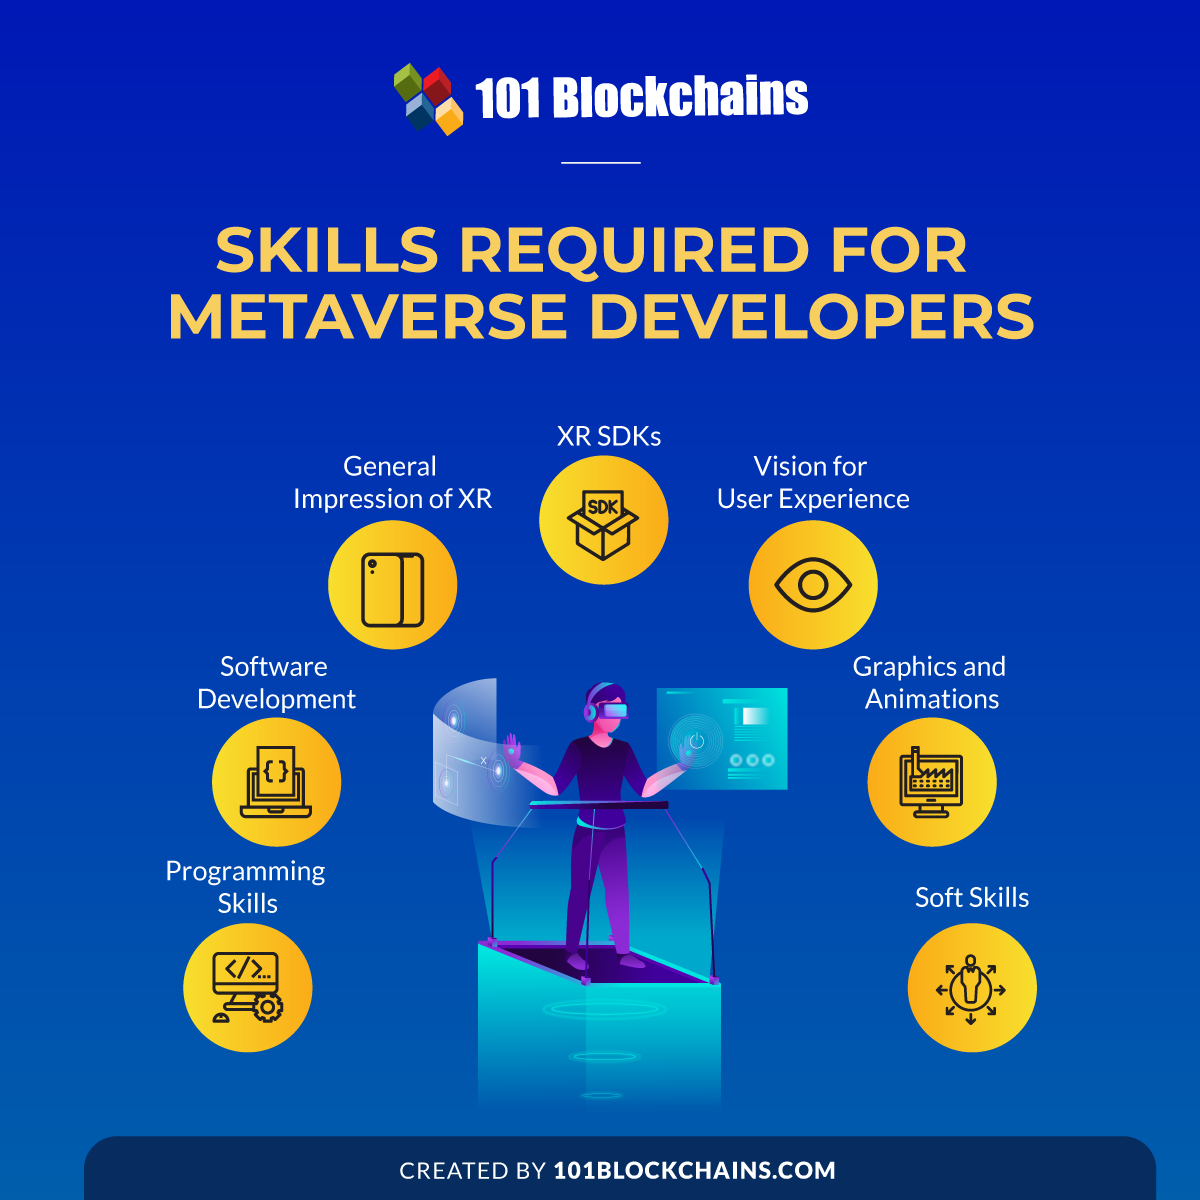 Skills Required for Metaverse Developers